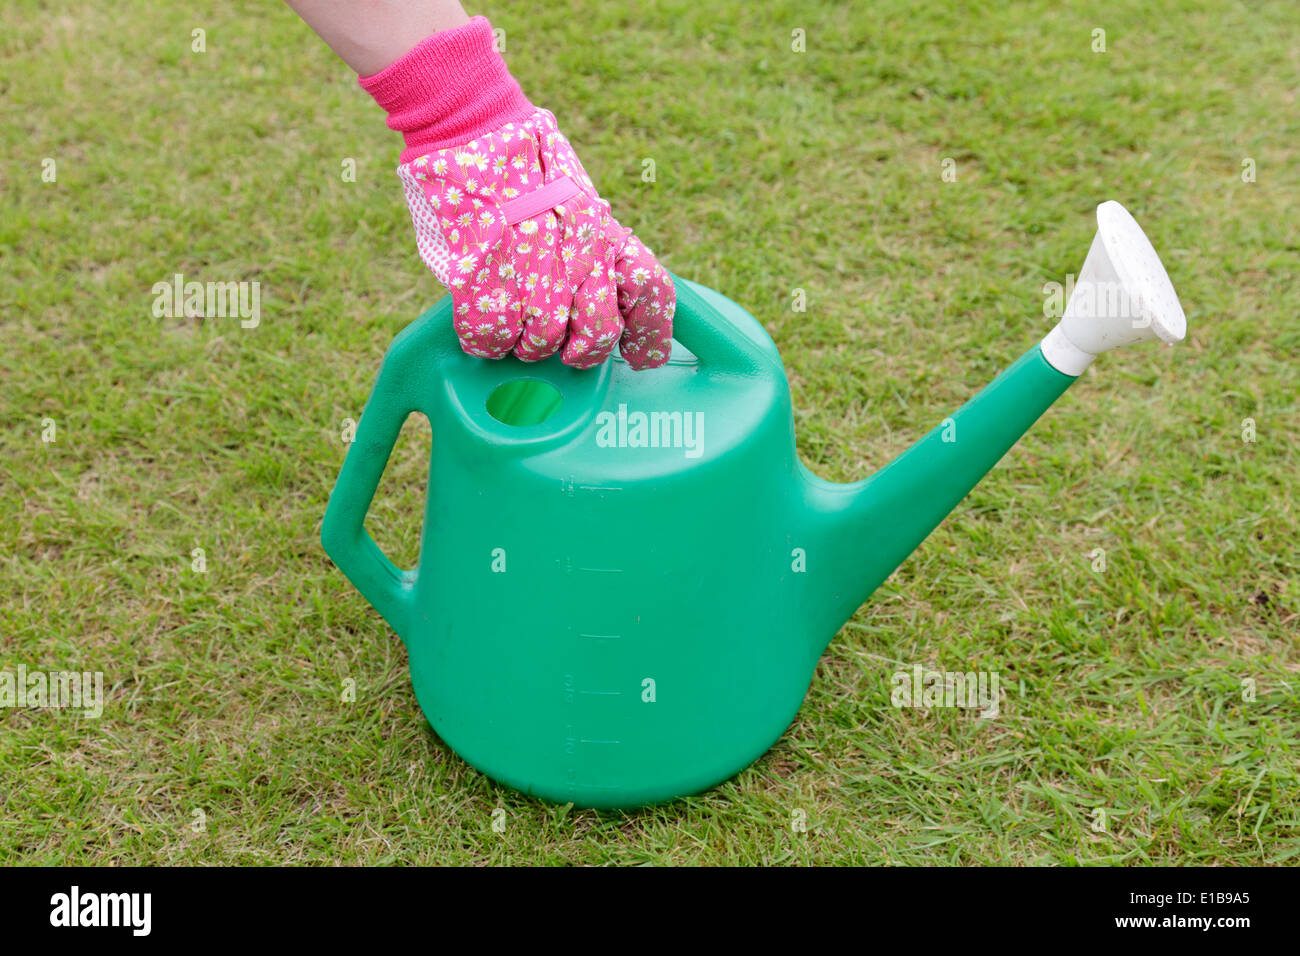 A woman wearing a pink gardening glove lifting a green plastic watering can, Scotland, UK Stock Photo